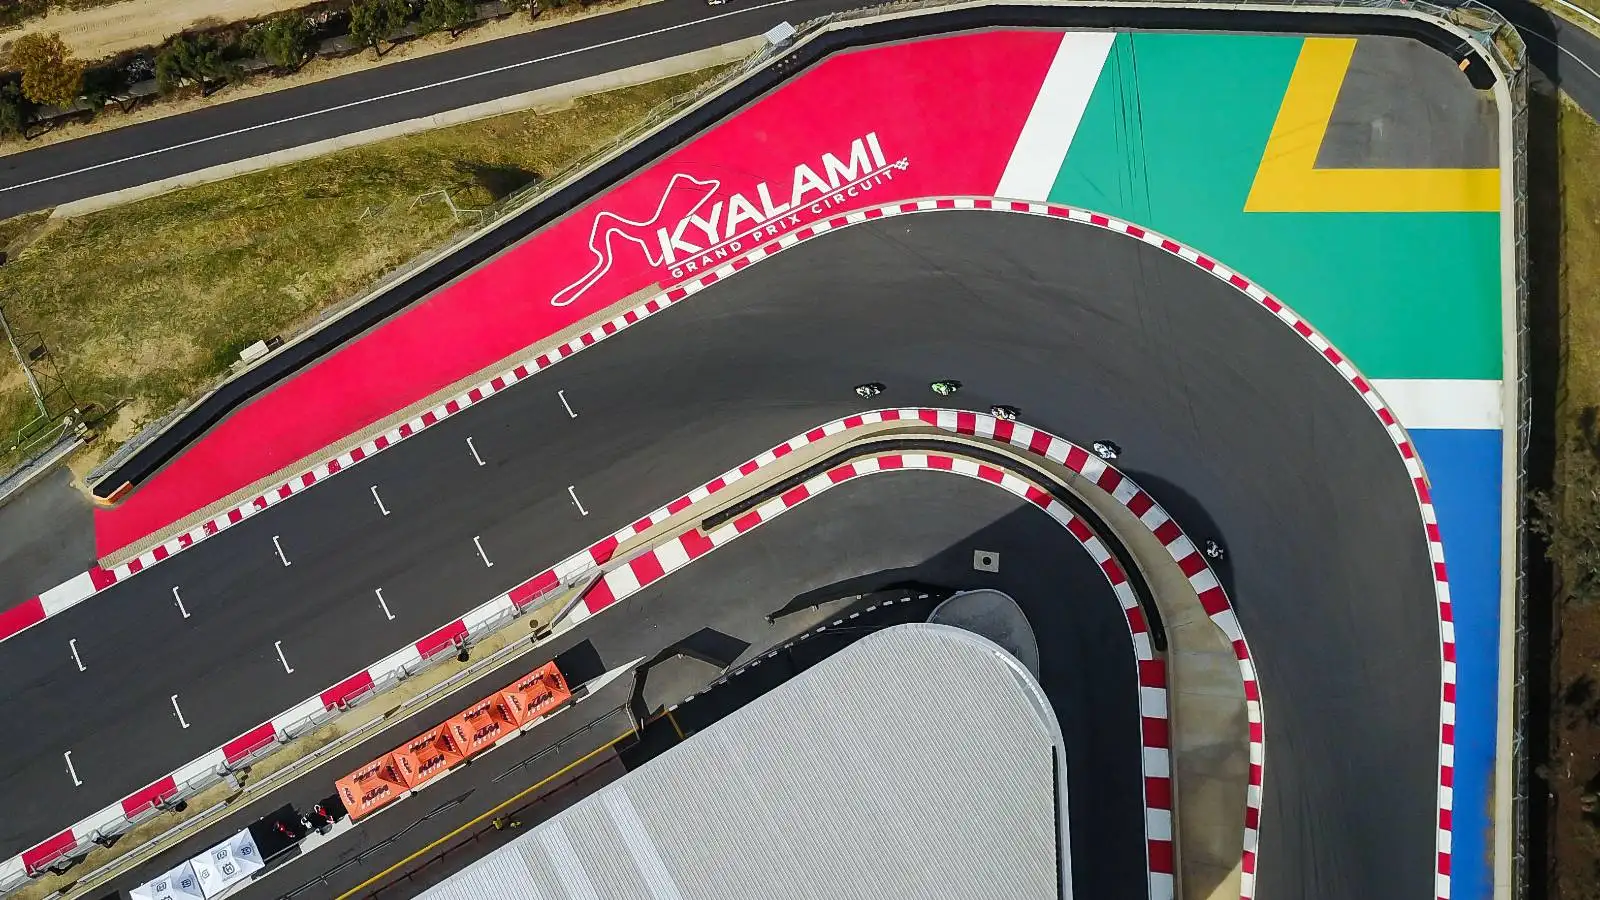 A view from above of Kyalami. South African GP venue, May 2017.